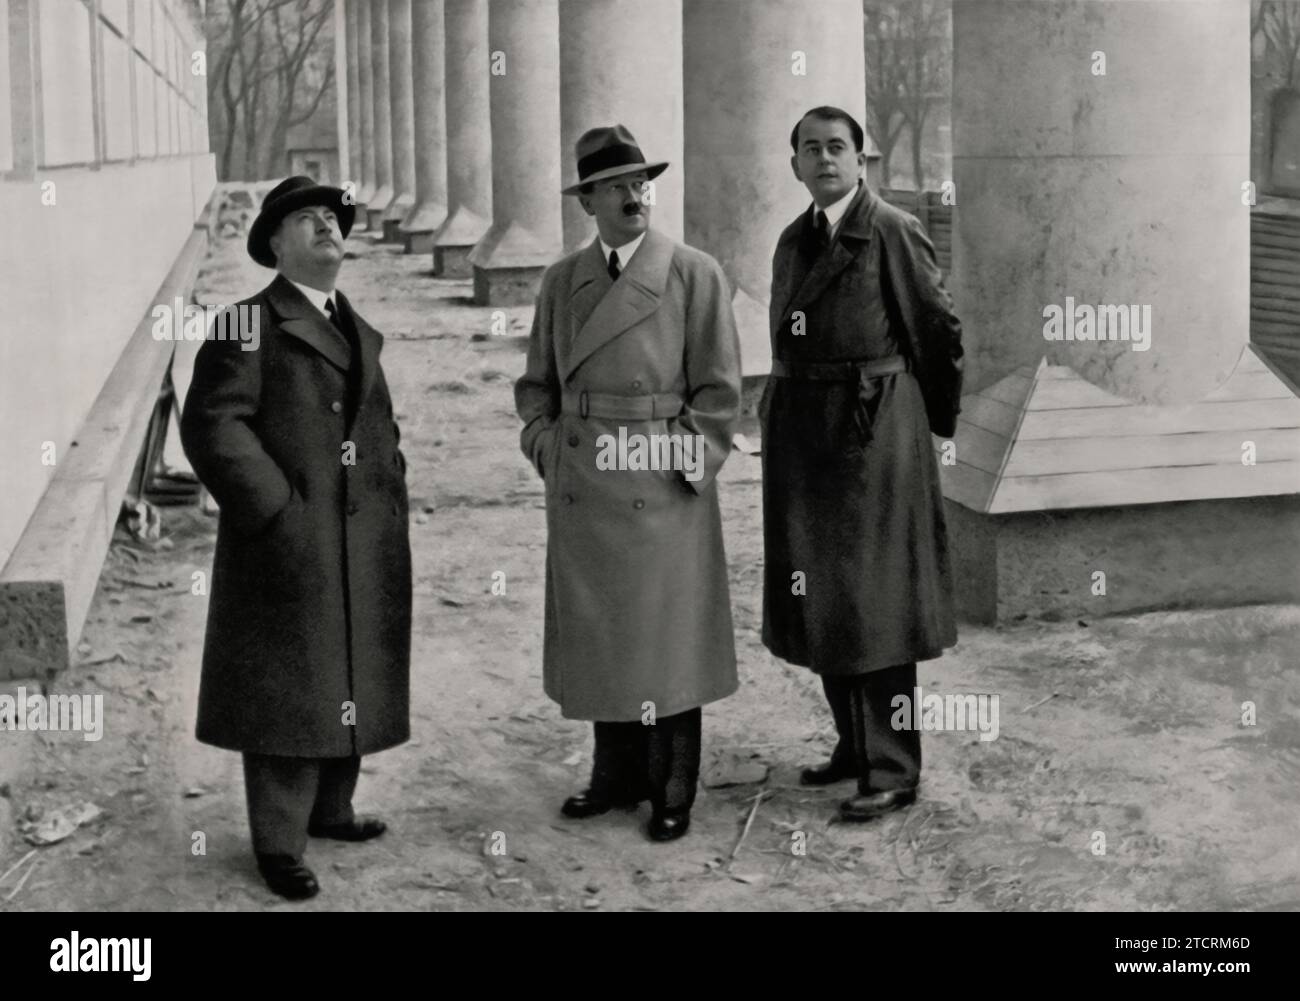 Adolf Hitler, alongside Professor Gall and architect Albert Speer, inspects the construction progress of the House of German Art in Munich. This visit highlights the collaboration between Hitler and prominent architects in realizing his vision for Nazi architecture. The House of German Art, a key project for the regime, was designed to embody the Nazi ideals in art and architecture. Speer, known for his close association with Hitler, played a crucial role in bringing these architectural visions to life, with the House of German Art being a prime example of their joint efforts. Stock Photo